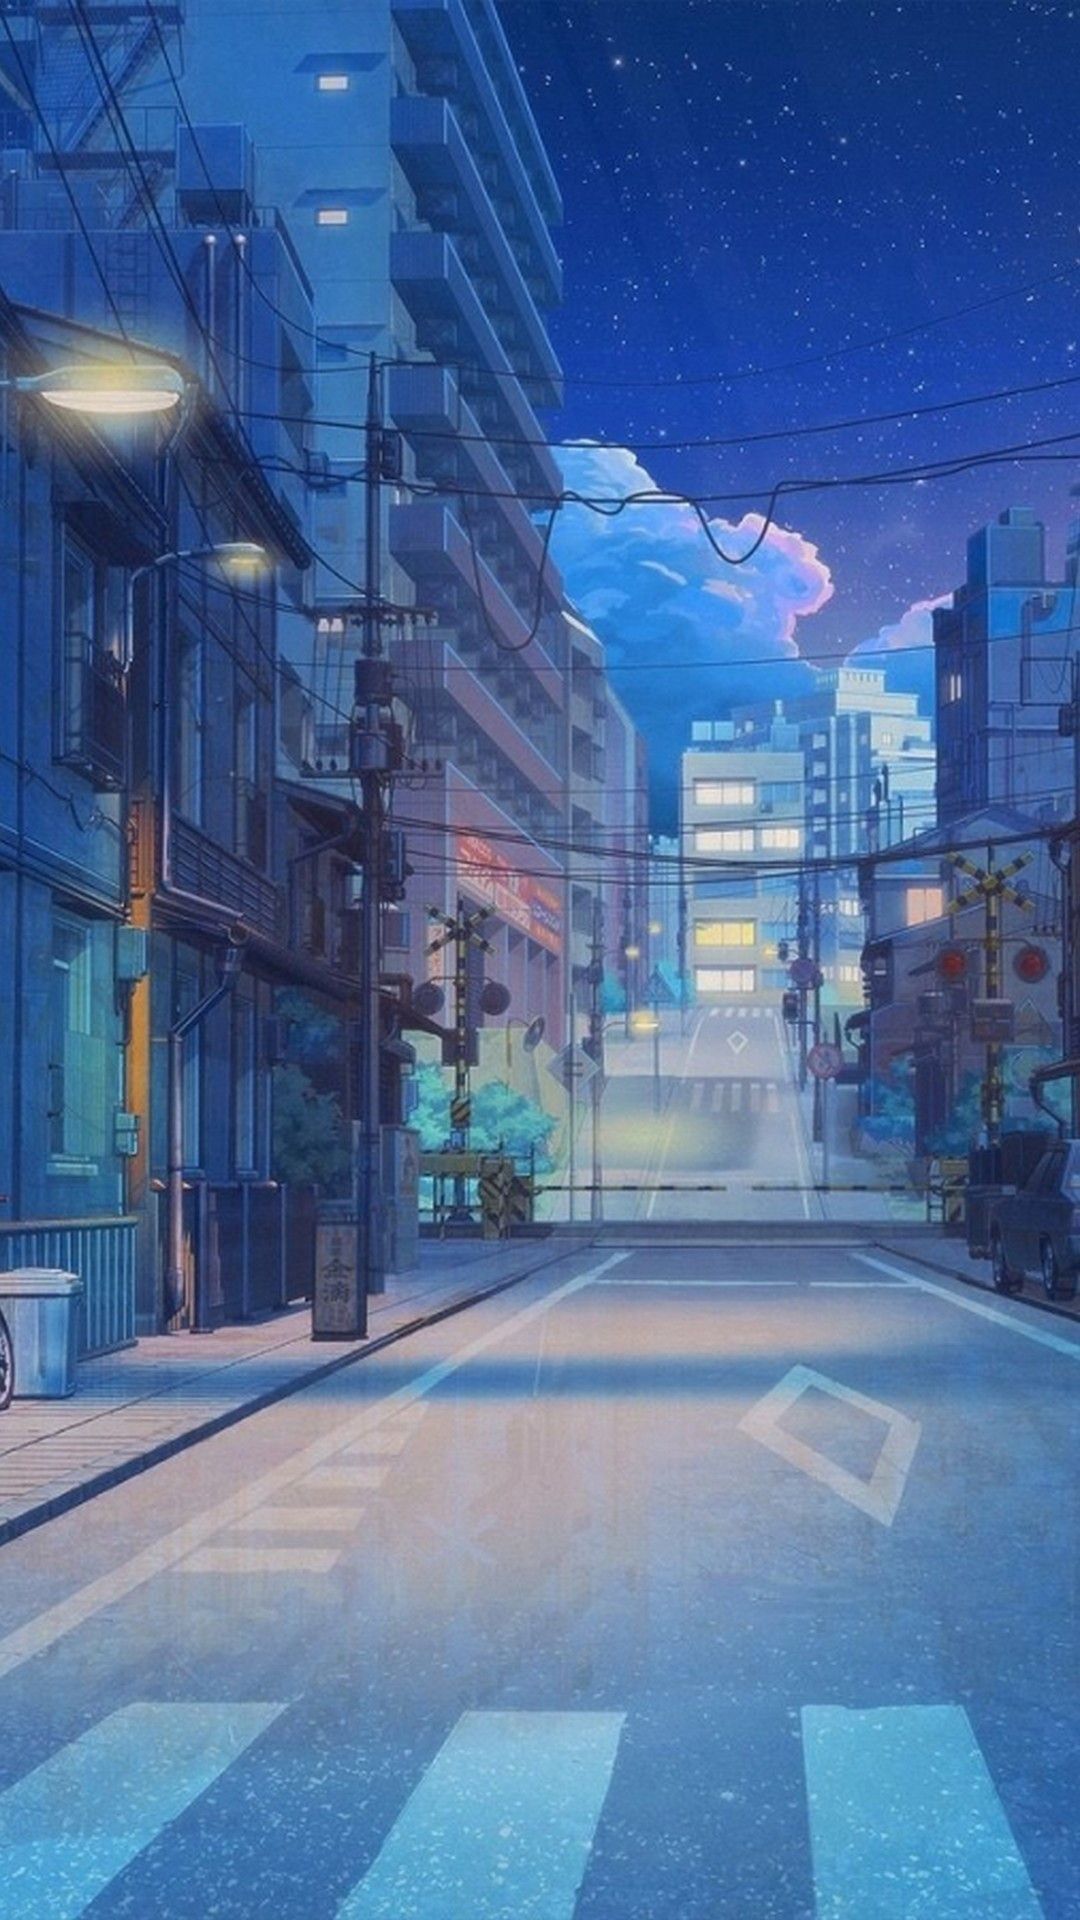 Anime city street at night wallpaper for iPhone. - Blue anime, road, anime, HD, Miami